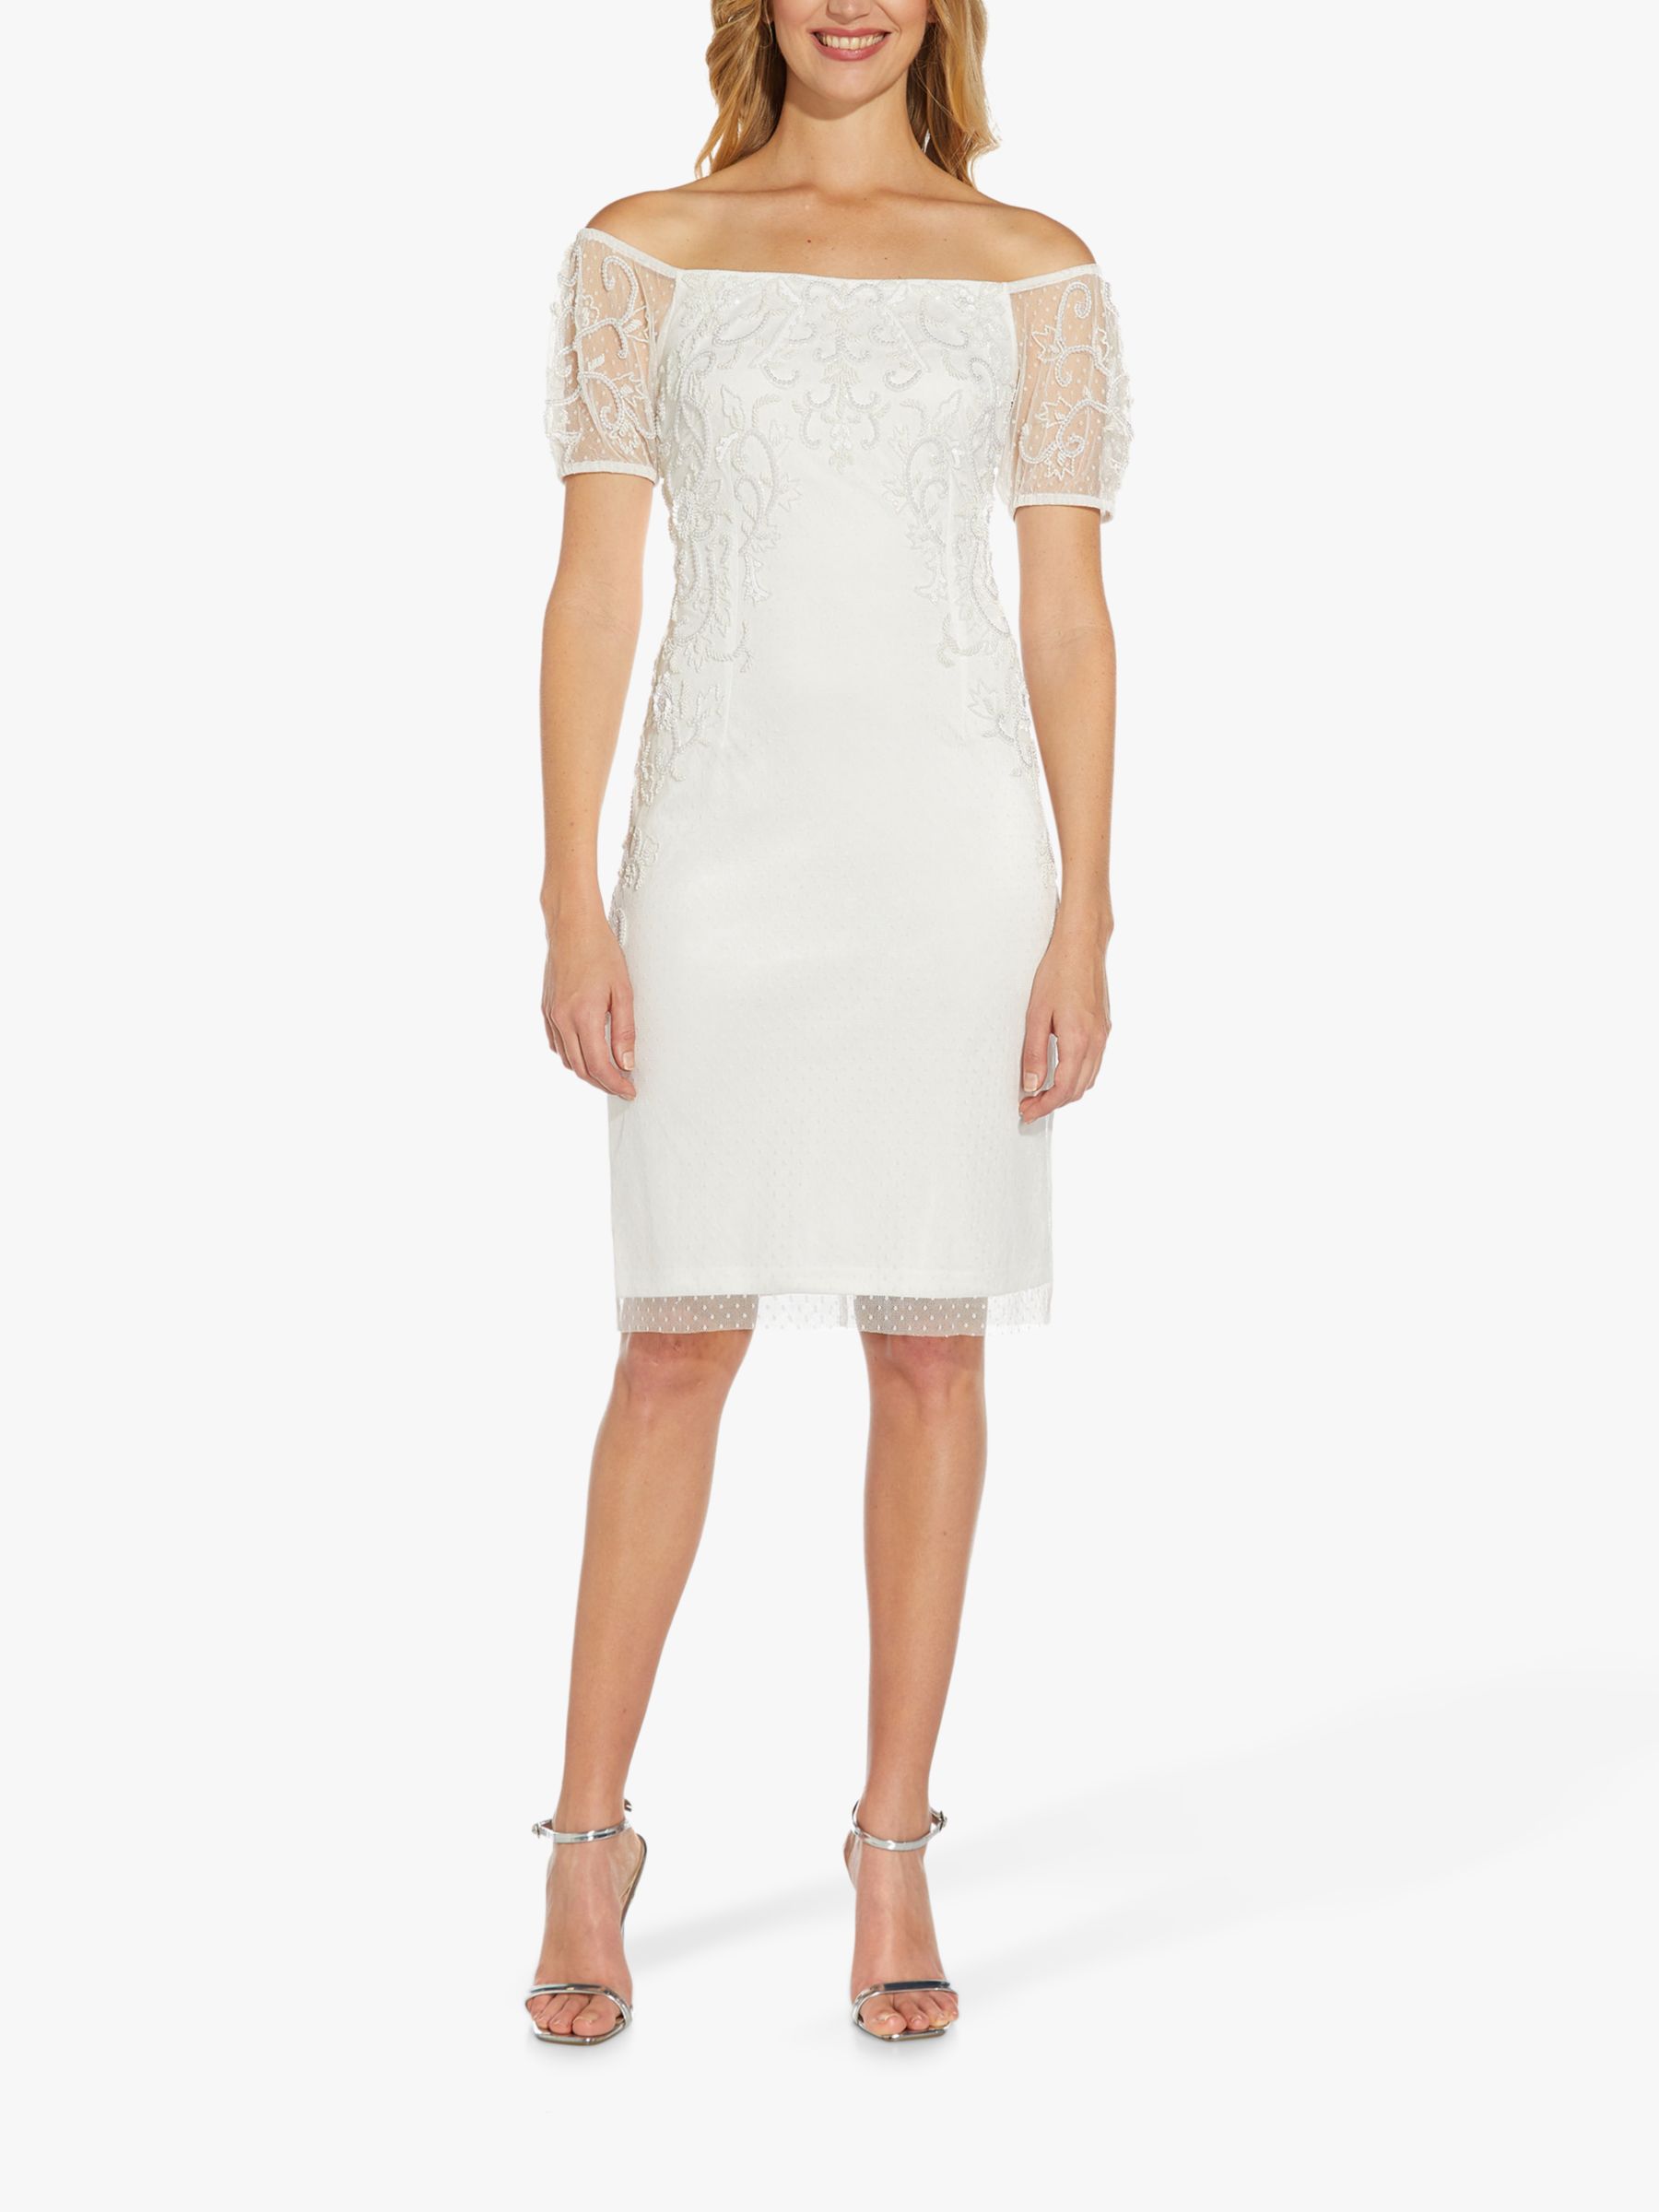 Adrianna Papell Off Shoulder Beaded Dress, Ivory